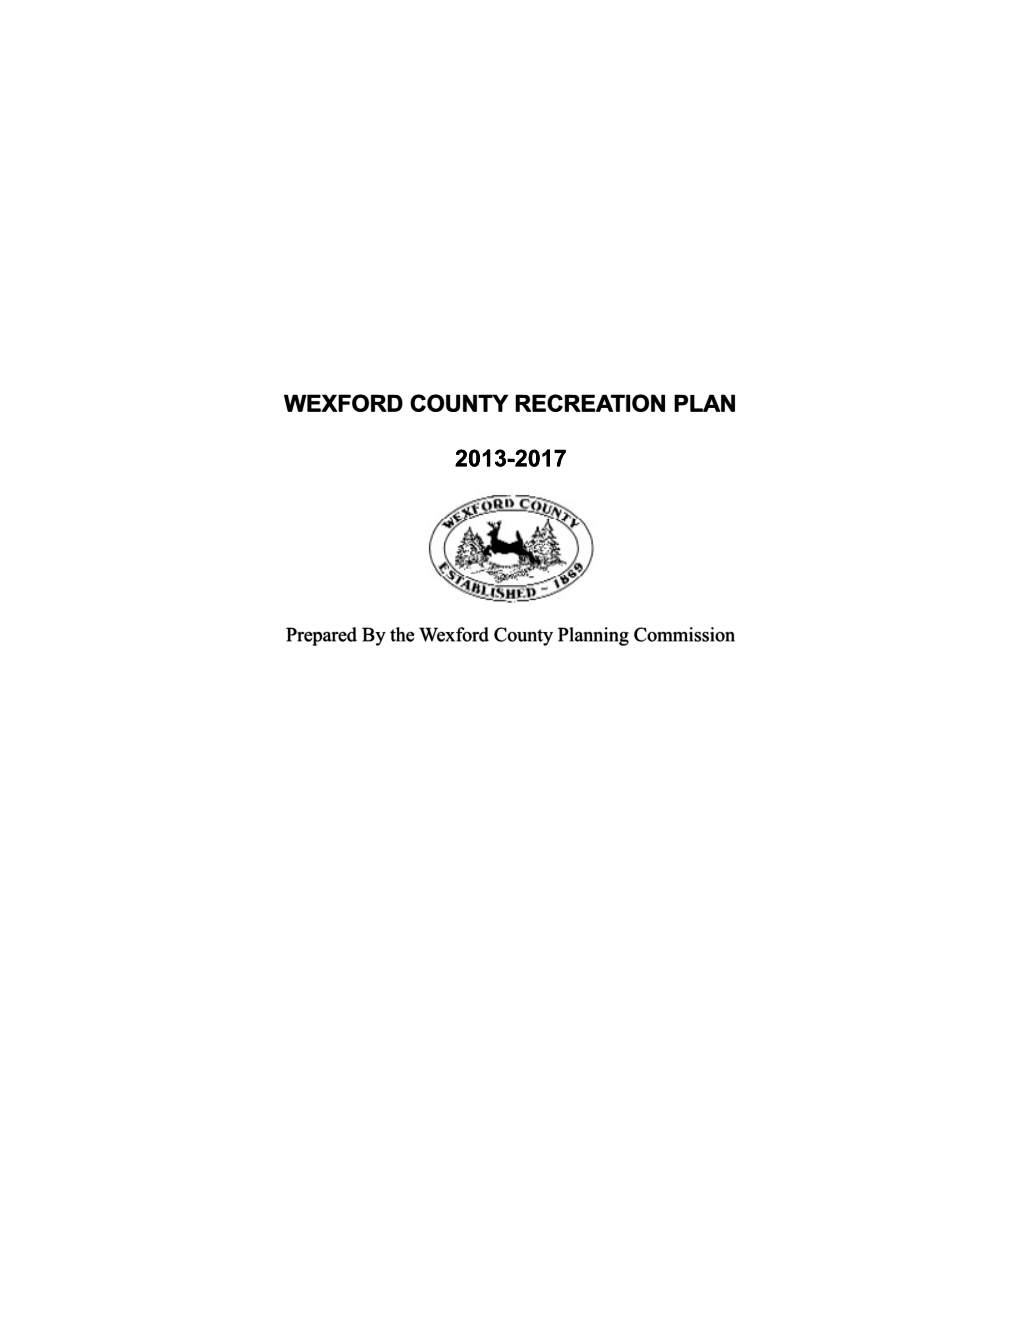 Wexford County Recreation Plan 2013-2017